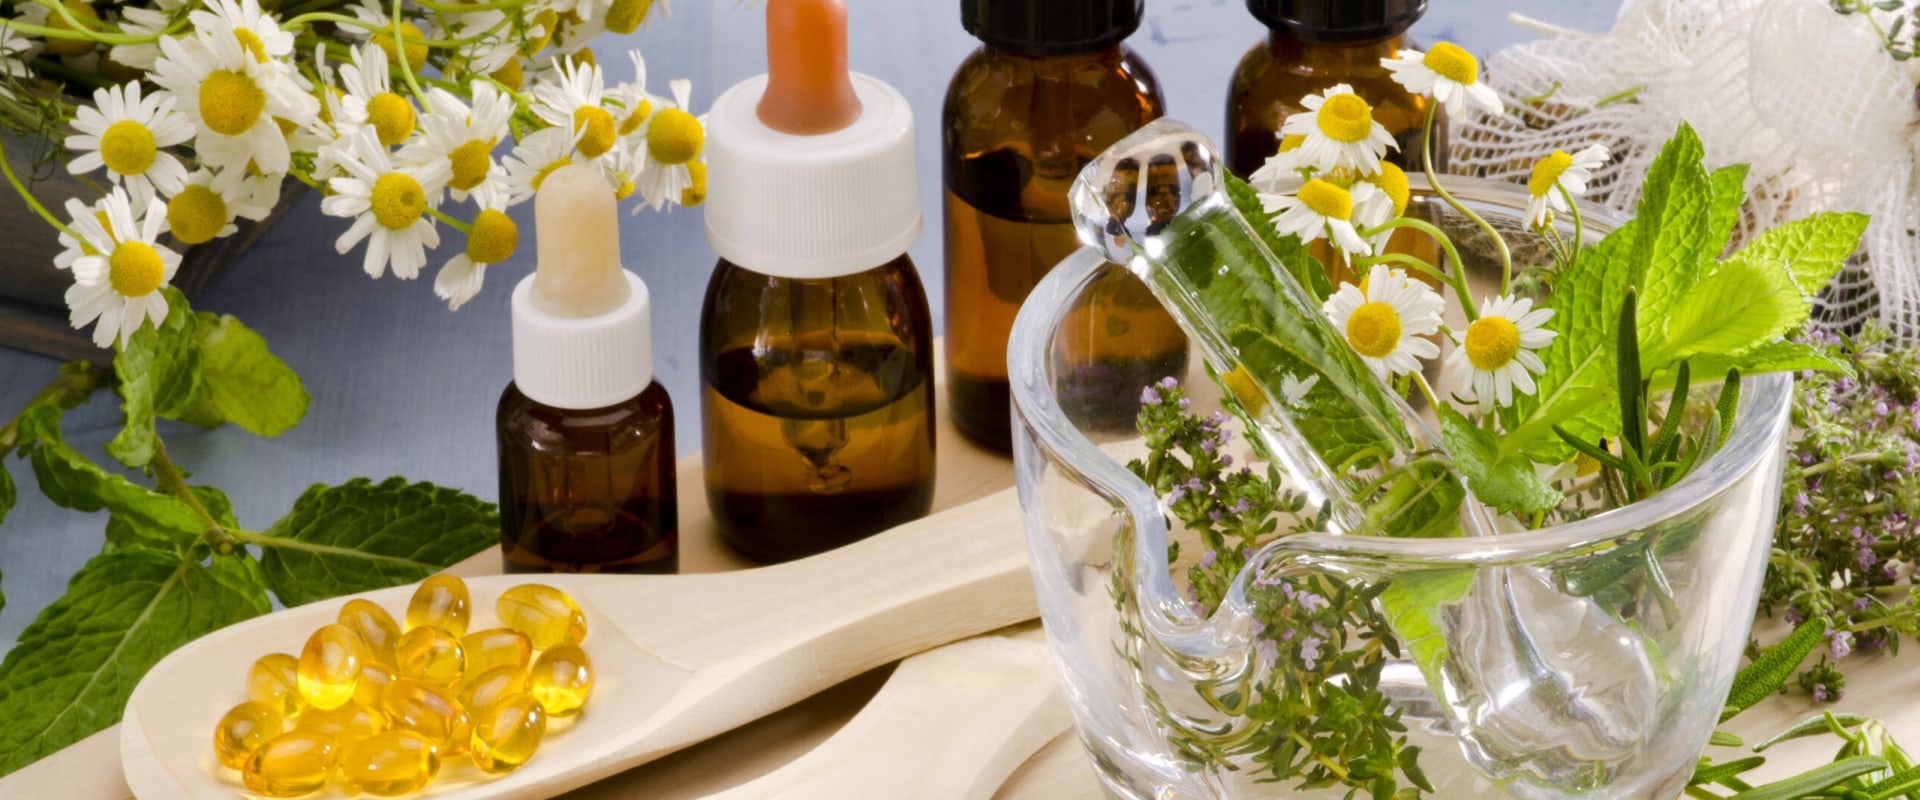 Can I Take Herbal Medicine with Supplements Safely? - An Expert's Perspective